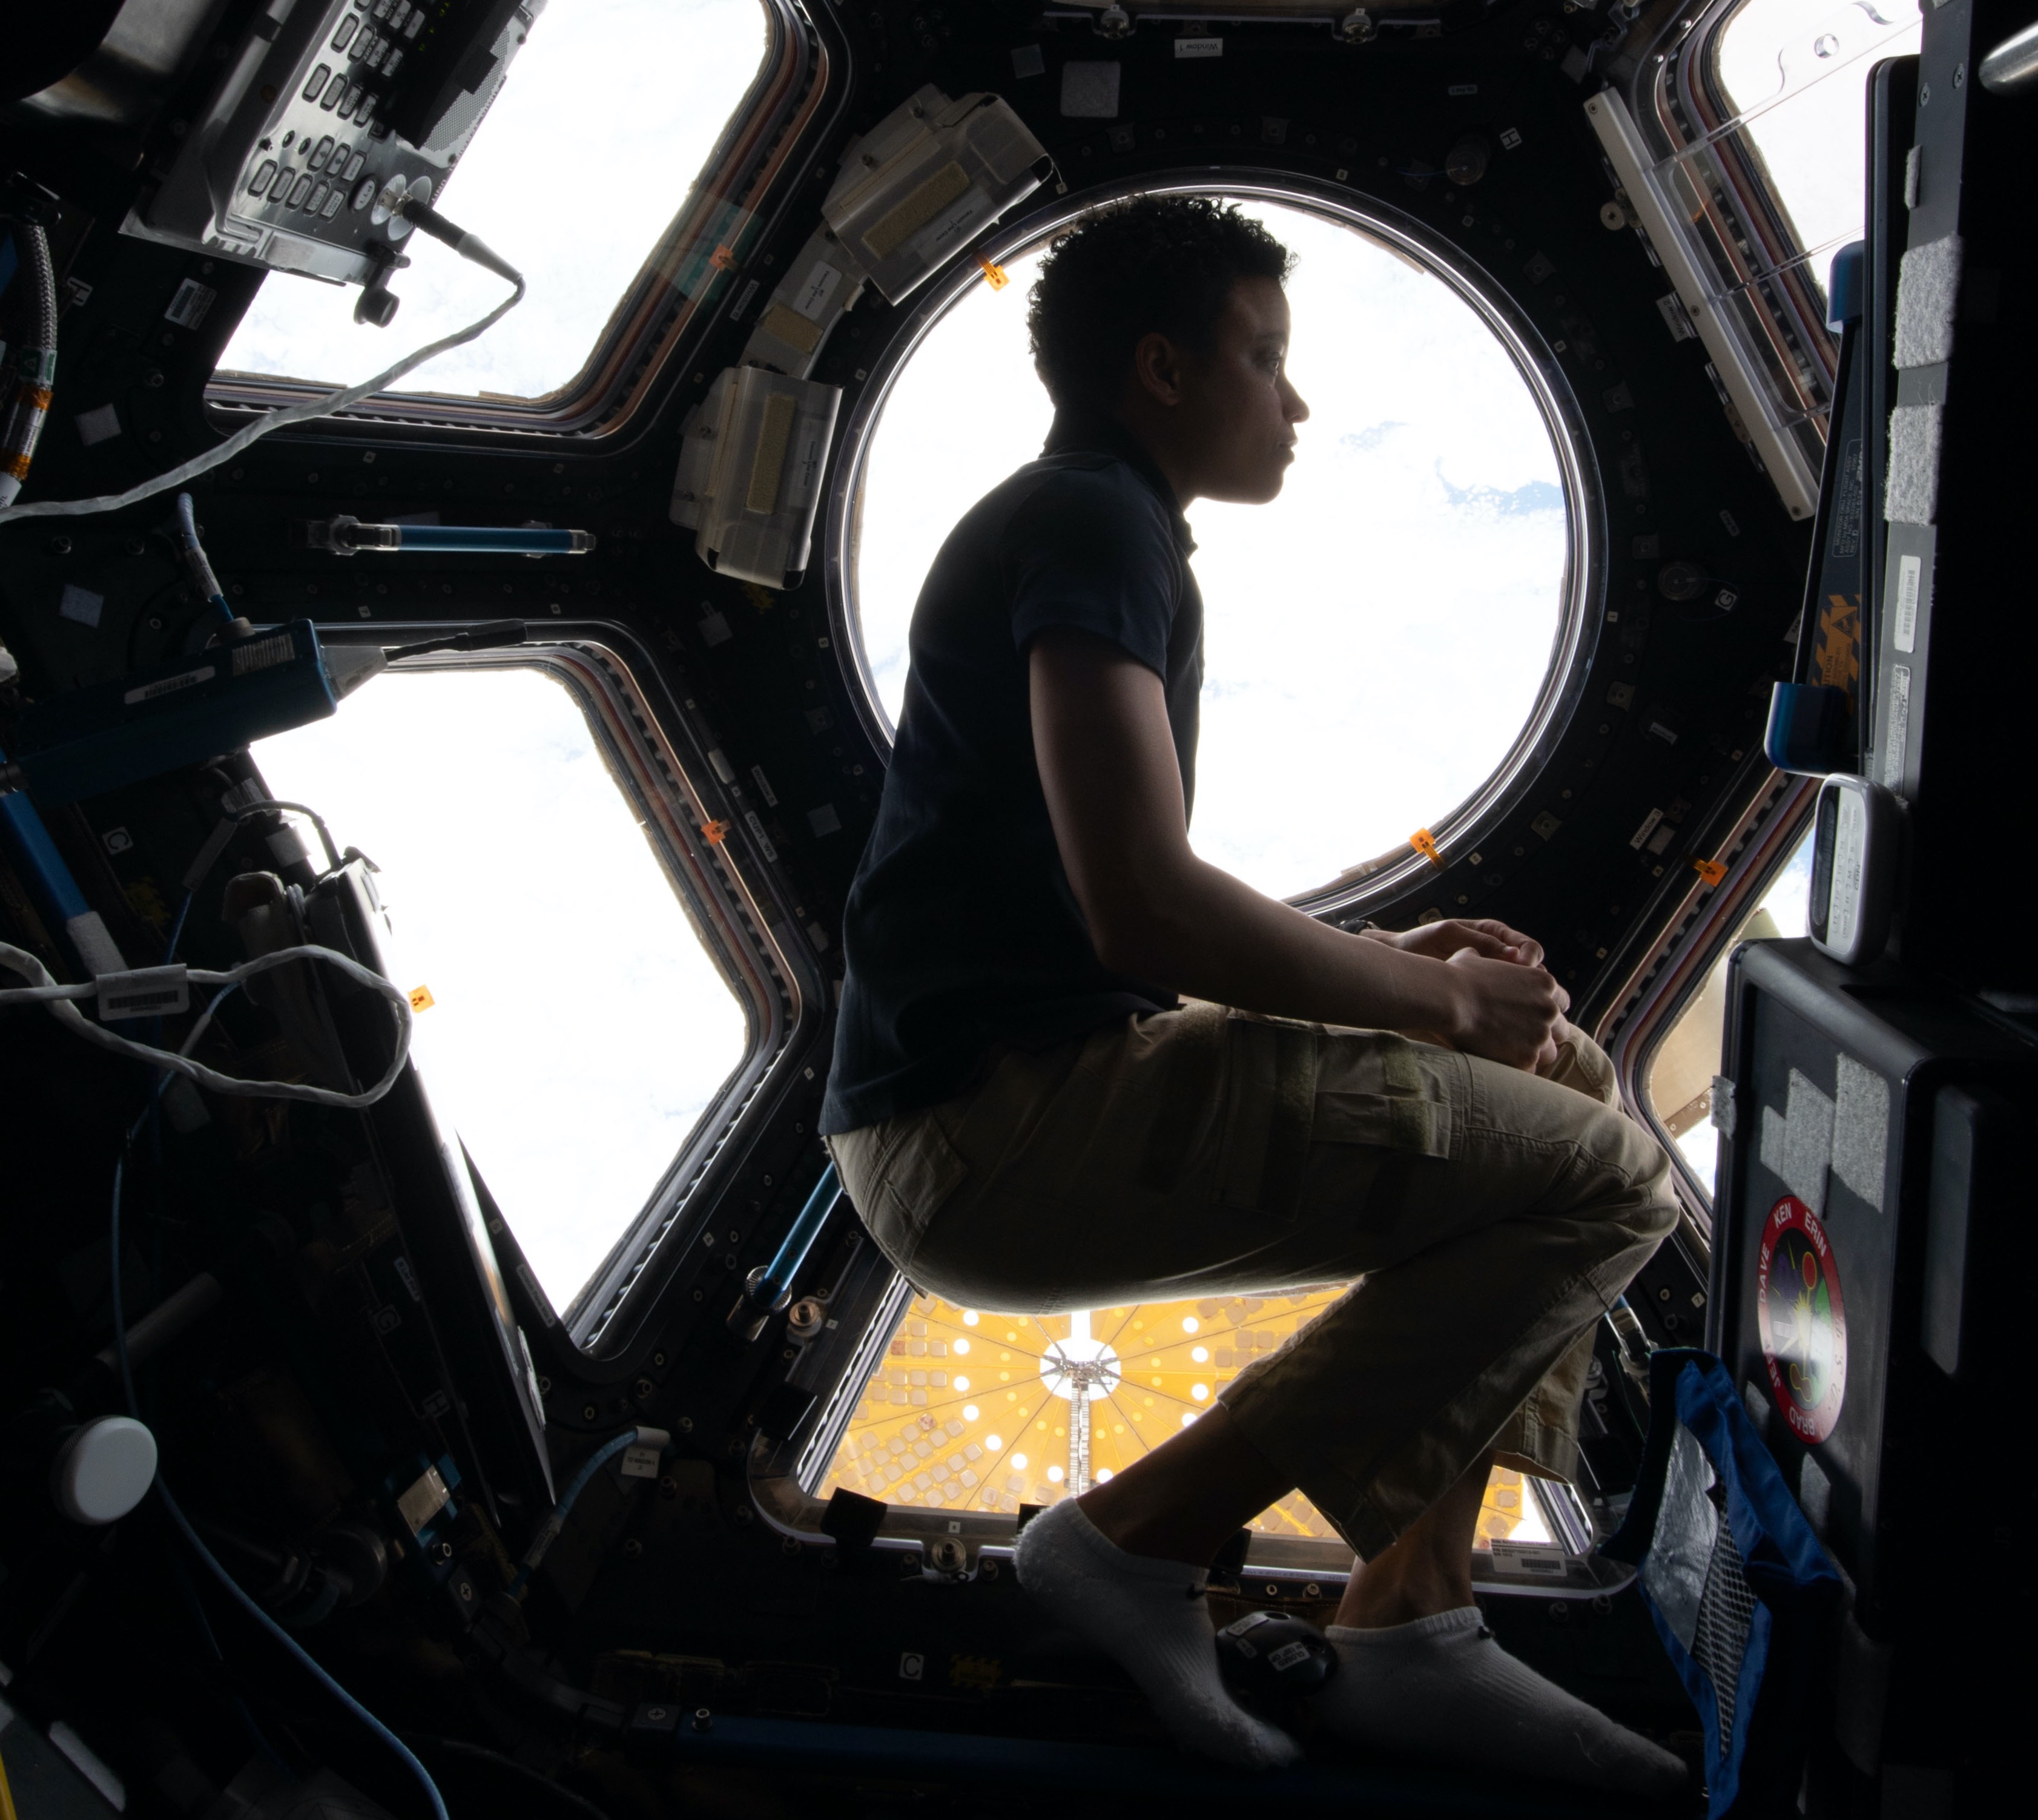 NASA astronaut Jessica Watkins floats in the International Space Station’s cupola in this photo, which NASA shared on May 9, 2022.